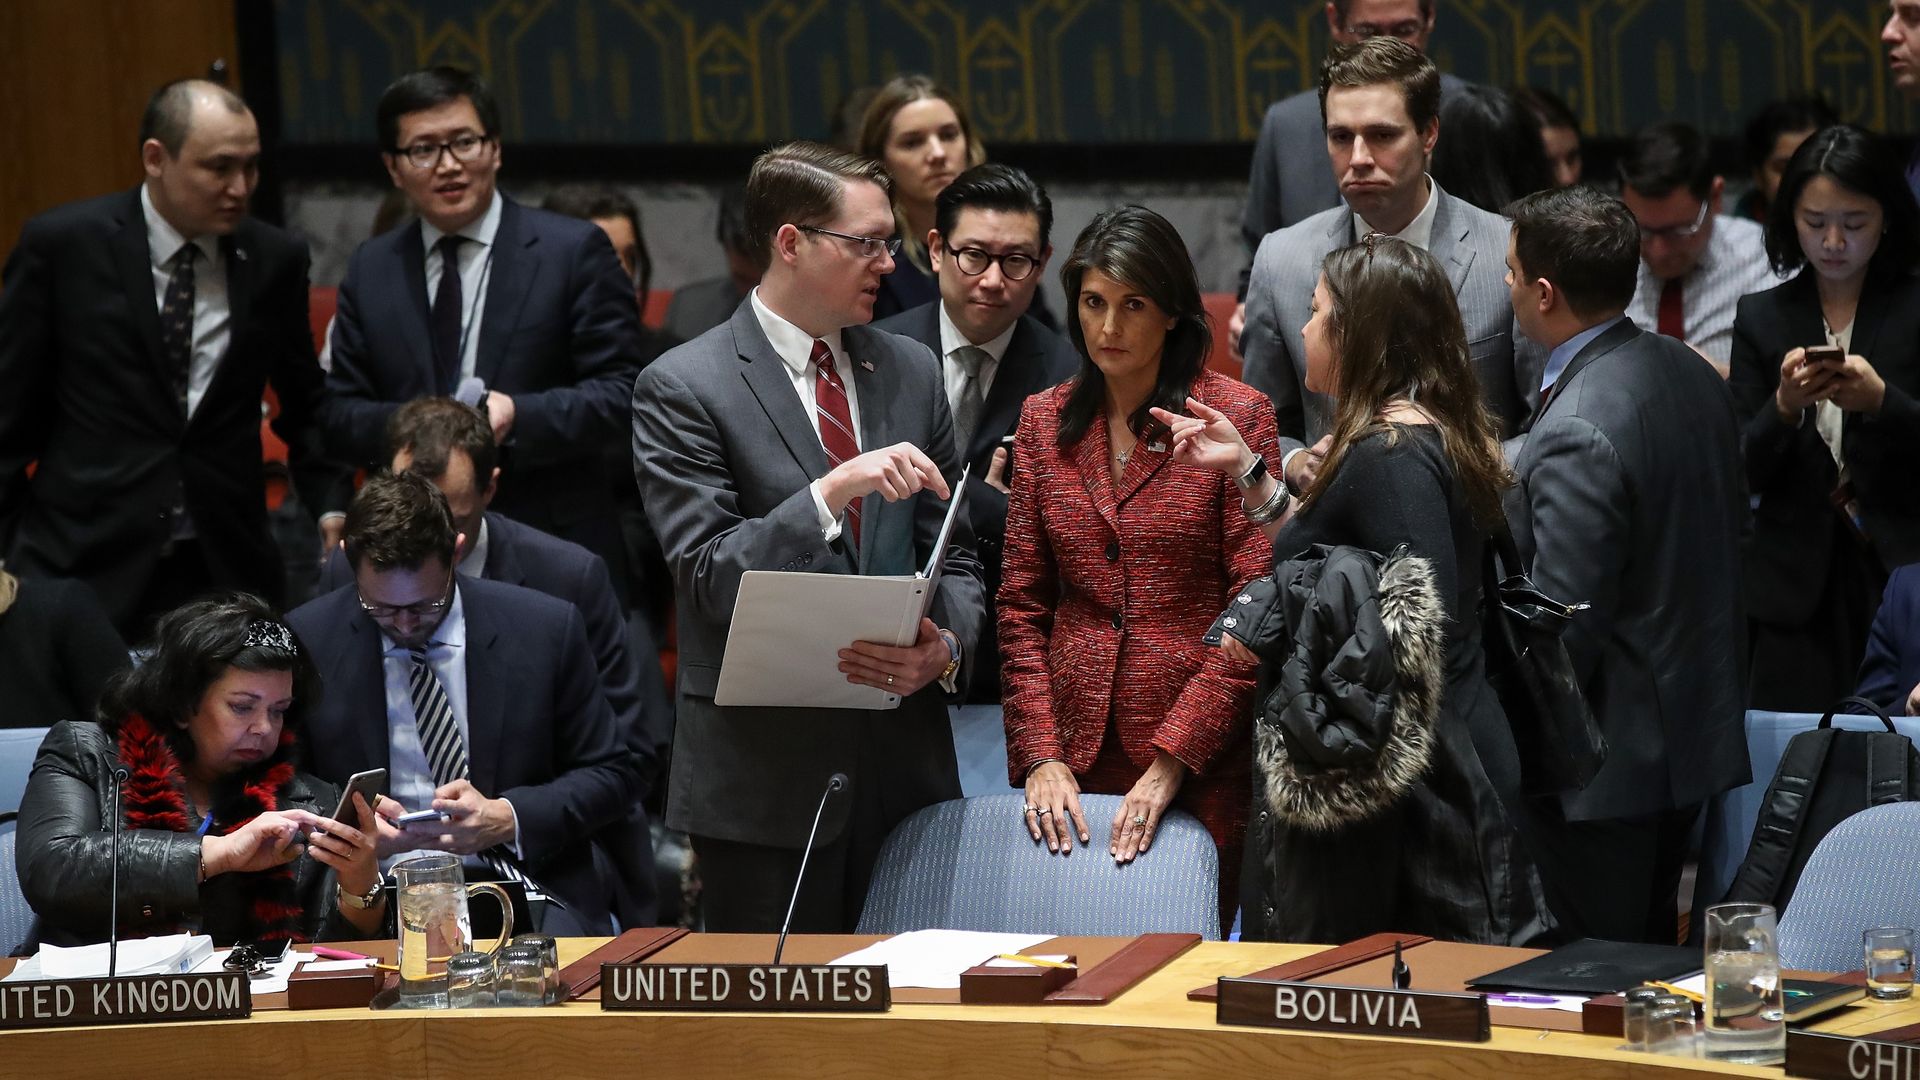 United States Ambassador to the United Nations Nikki Haley confers with members of the U.S. delegation at the start of a United Nations Security Council meeting regarding the situation in Syria